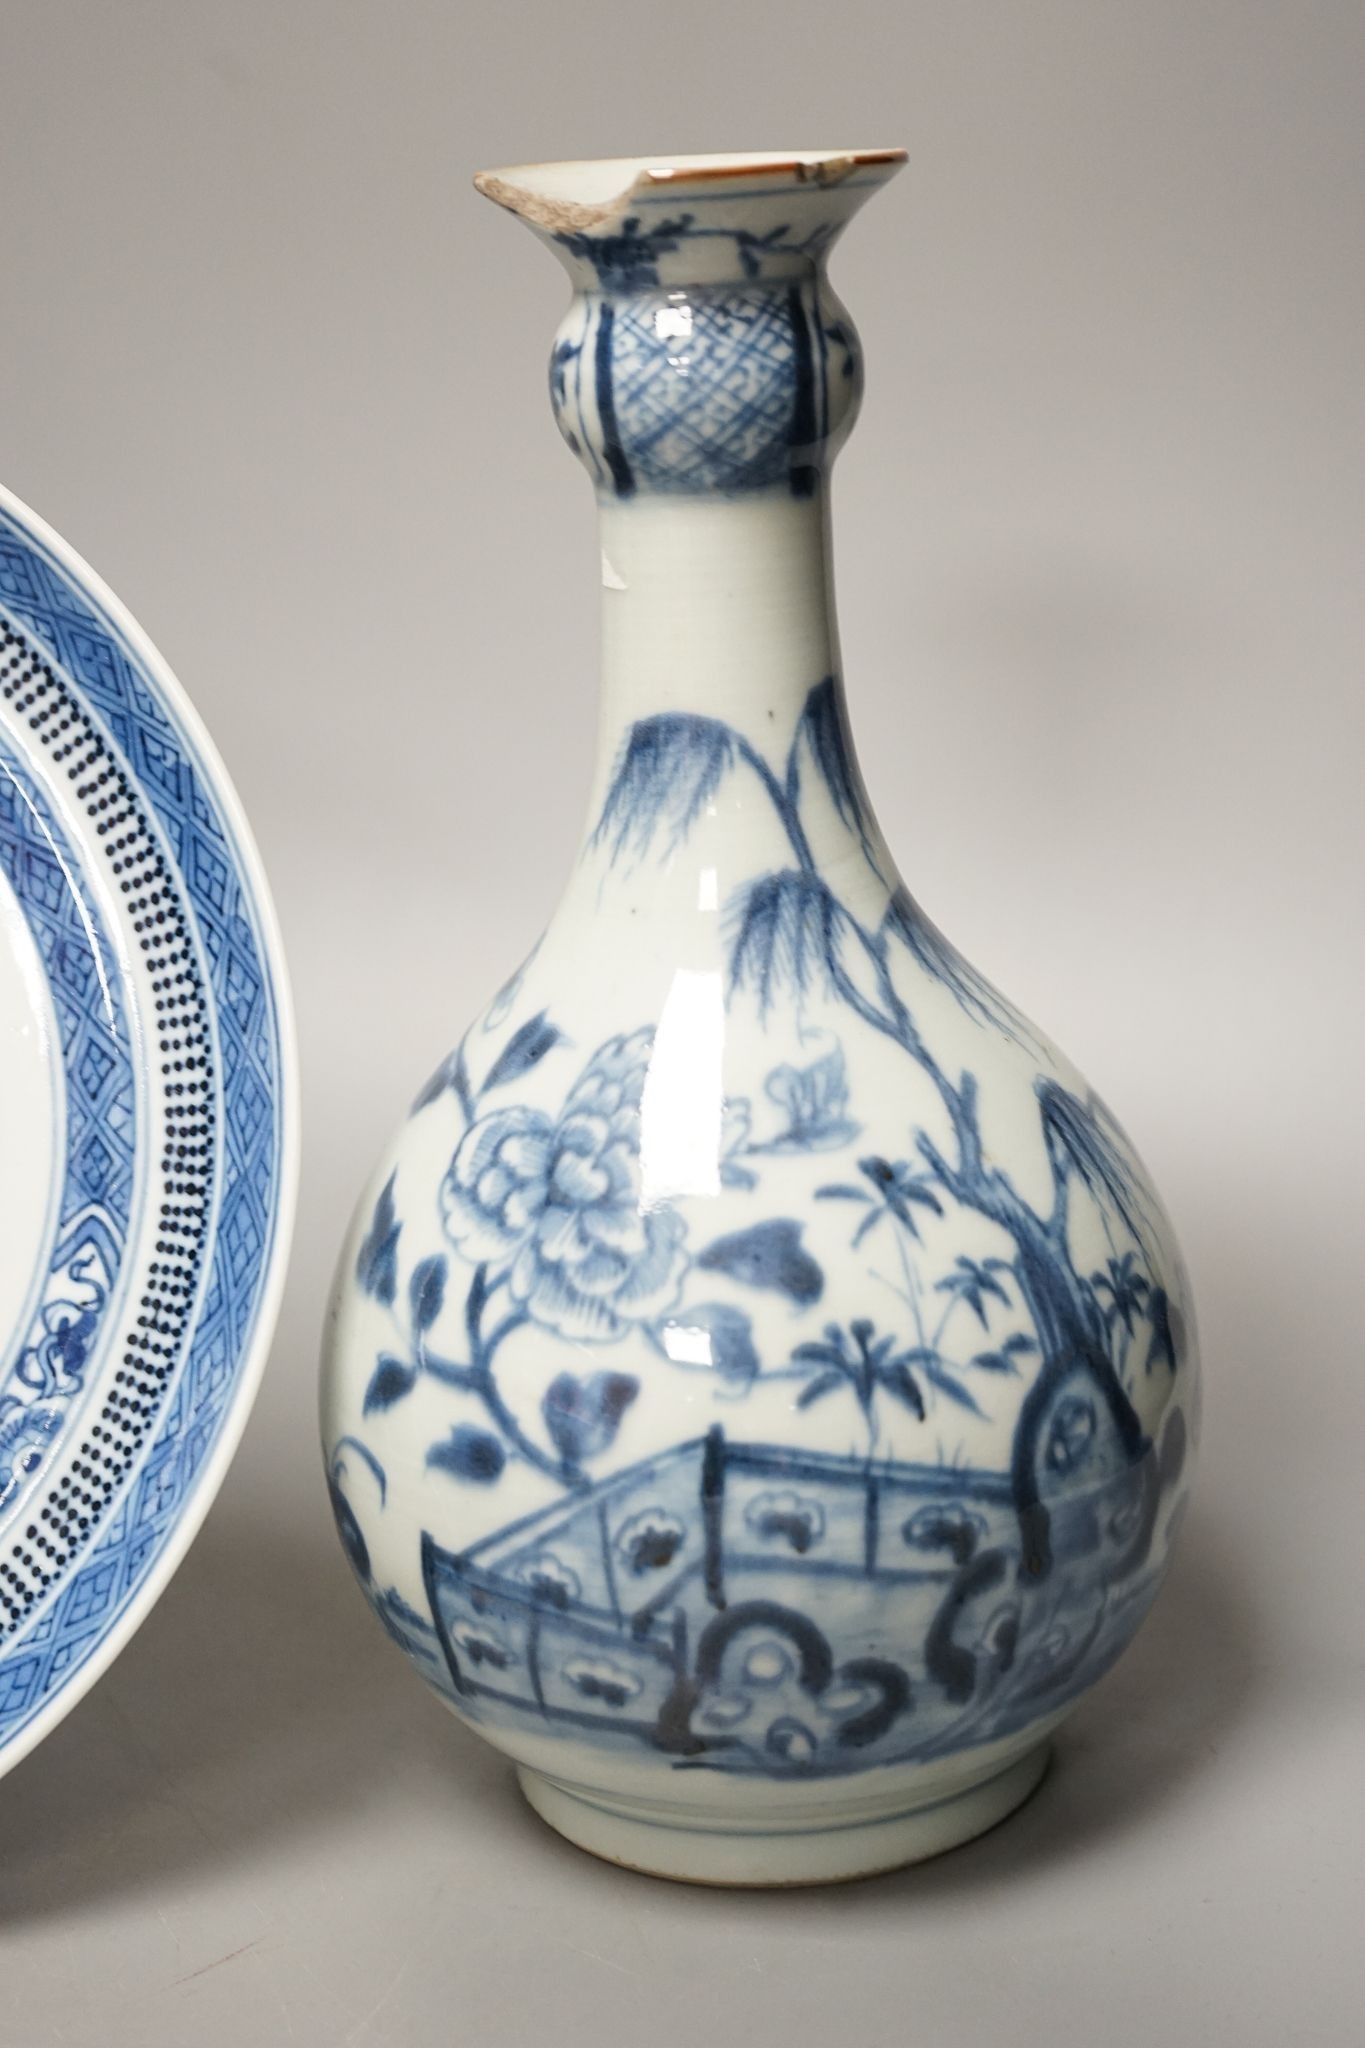 An 18th century Chinese blue and white bottle vase and two 19th century blue and white plates, diameter of largest plate - 25cm